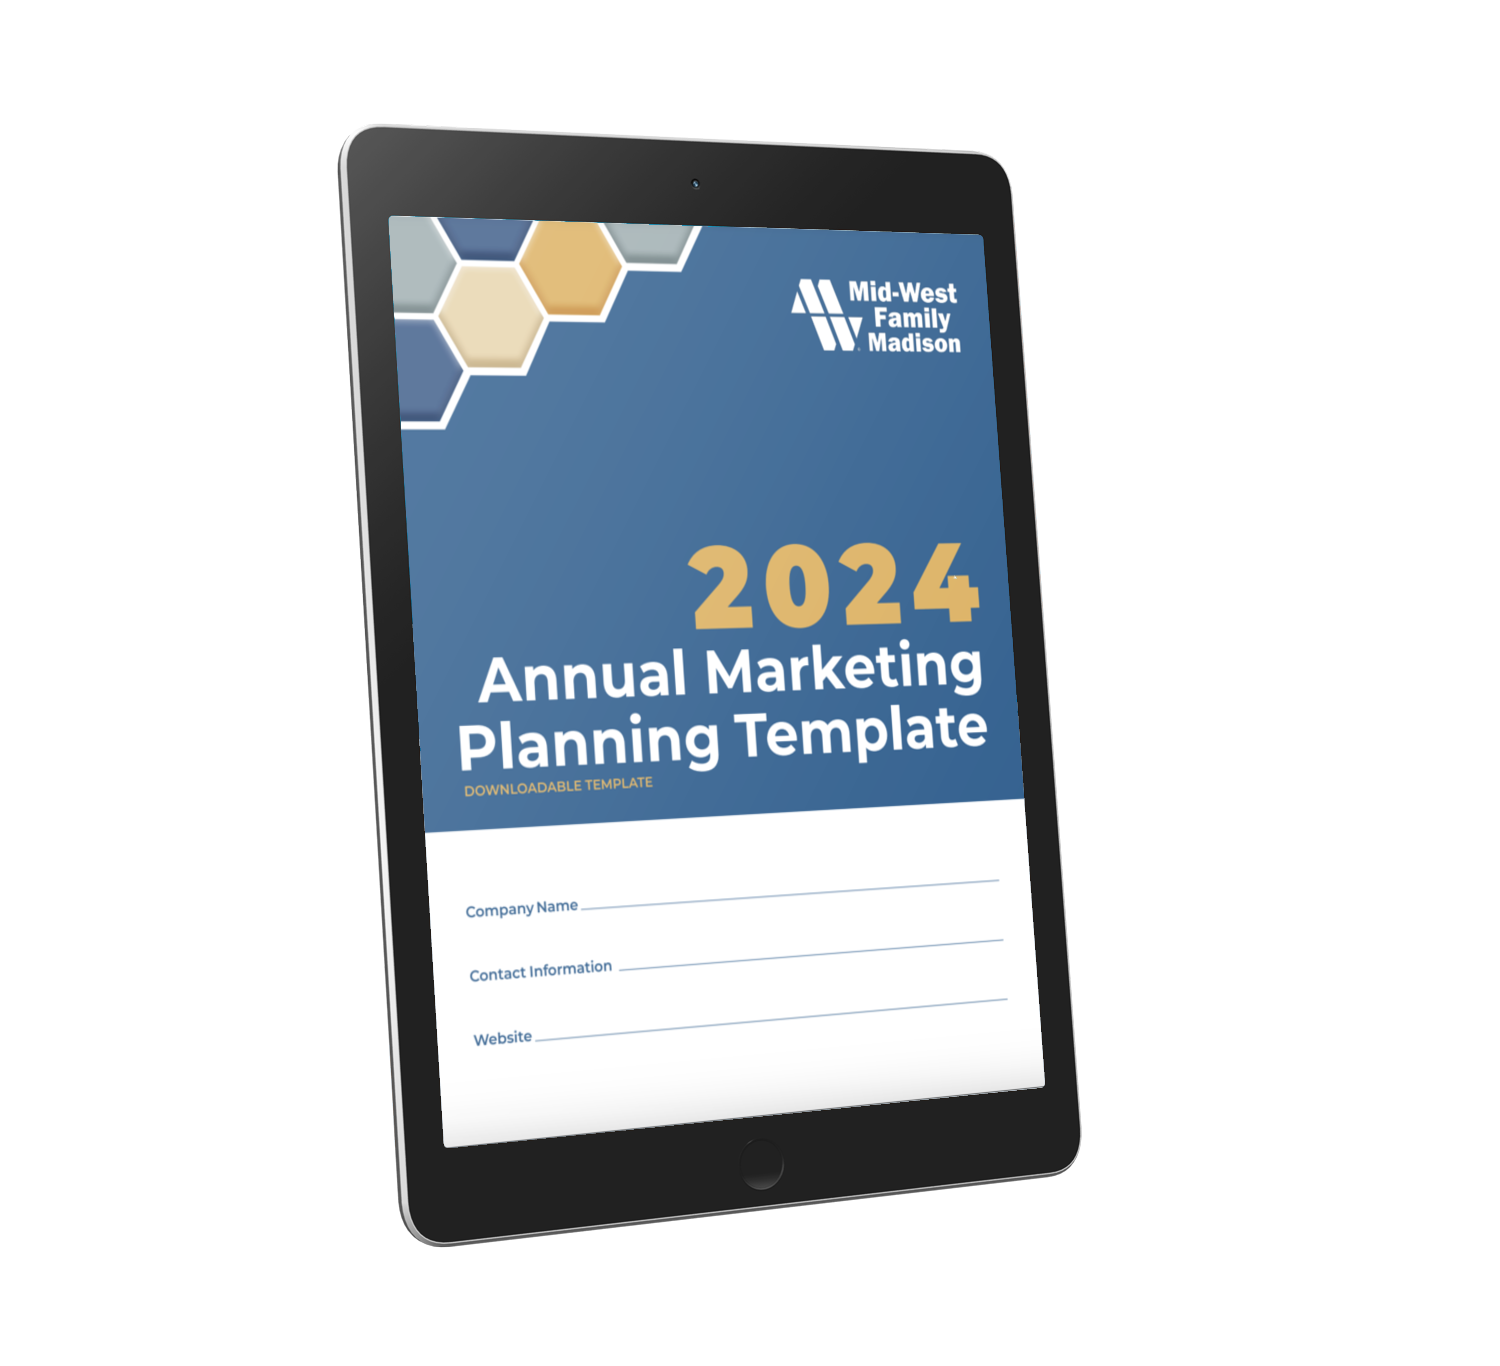 2024 Annual Marketing Planning Template